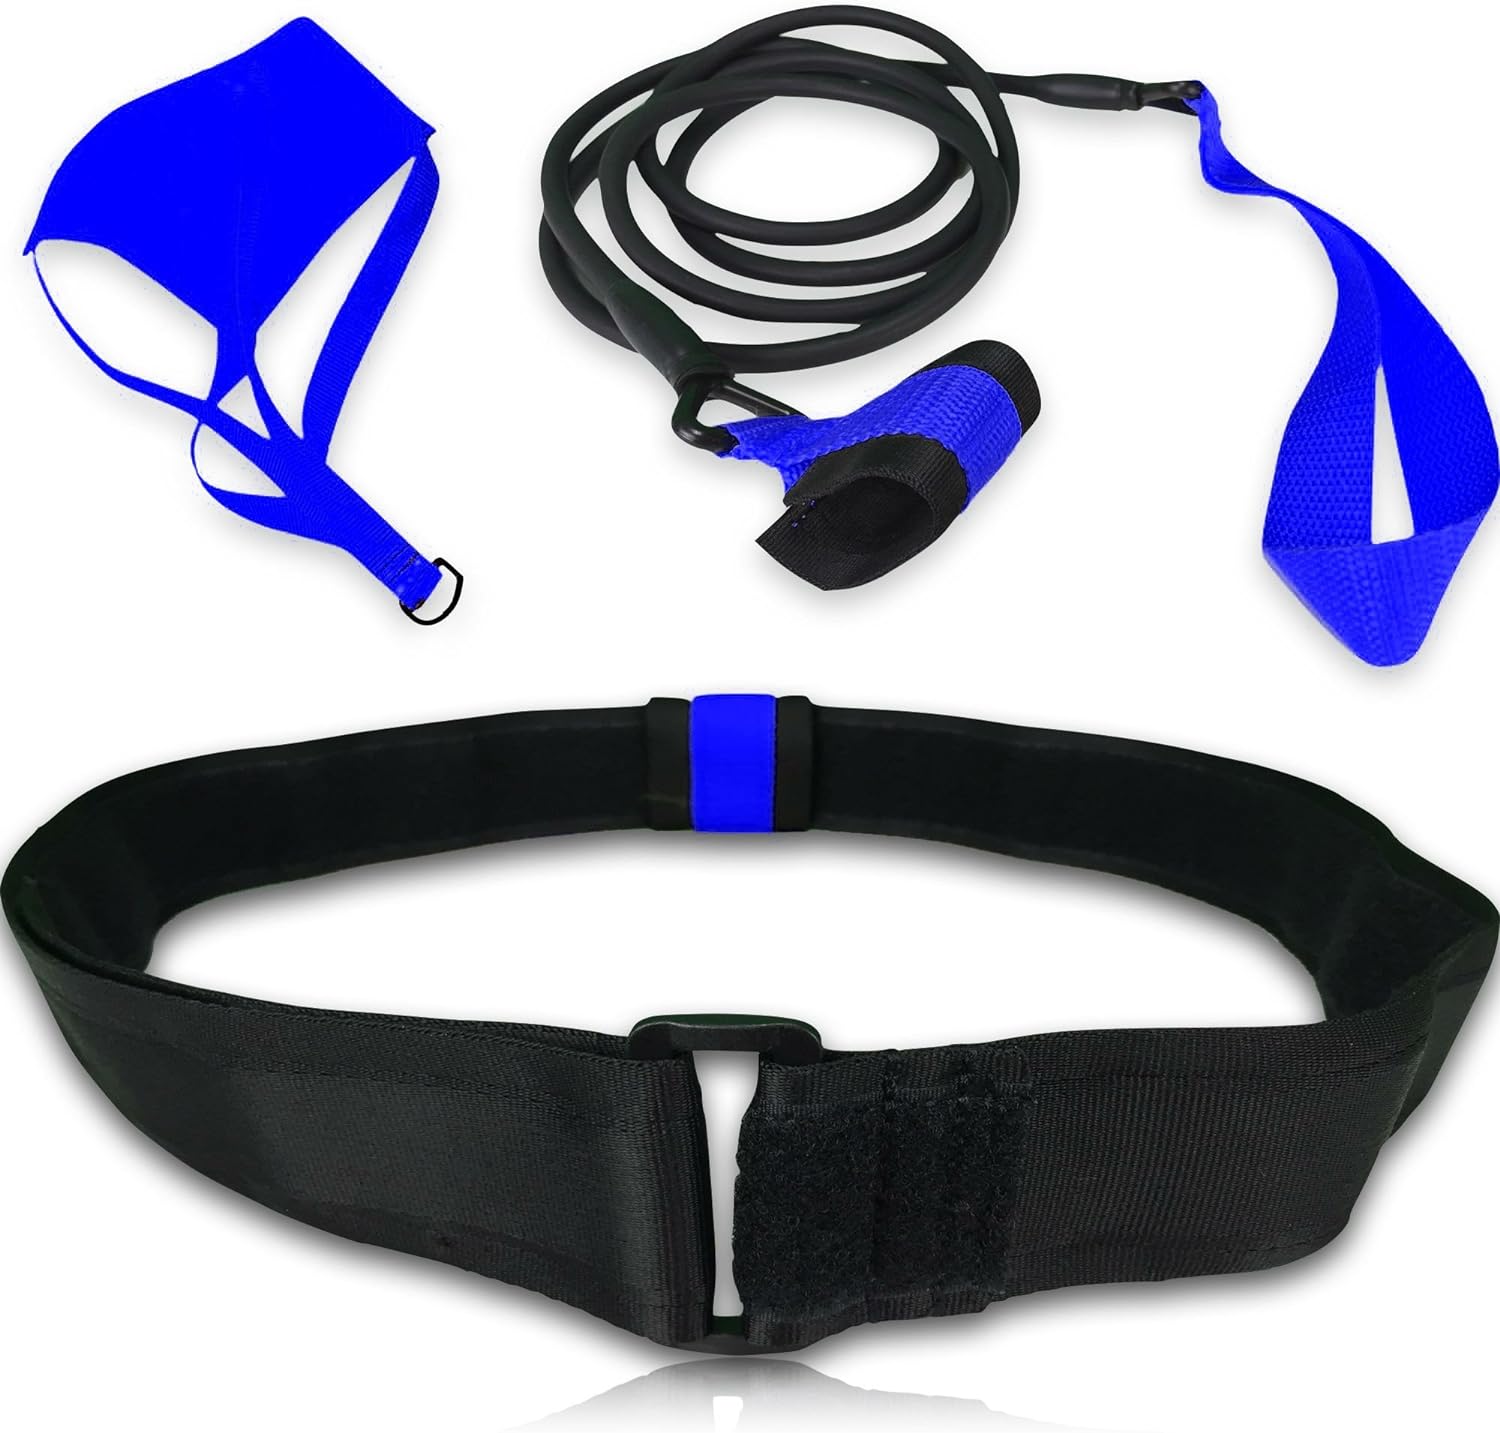 Reliable Outdoor Gear Swimming Belt - for Stationary Resistance Training/Endless Pool (with Drag Parachute and Elastic Tether) - Men Women, Kid, Pro/Amateur use